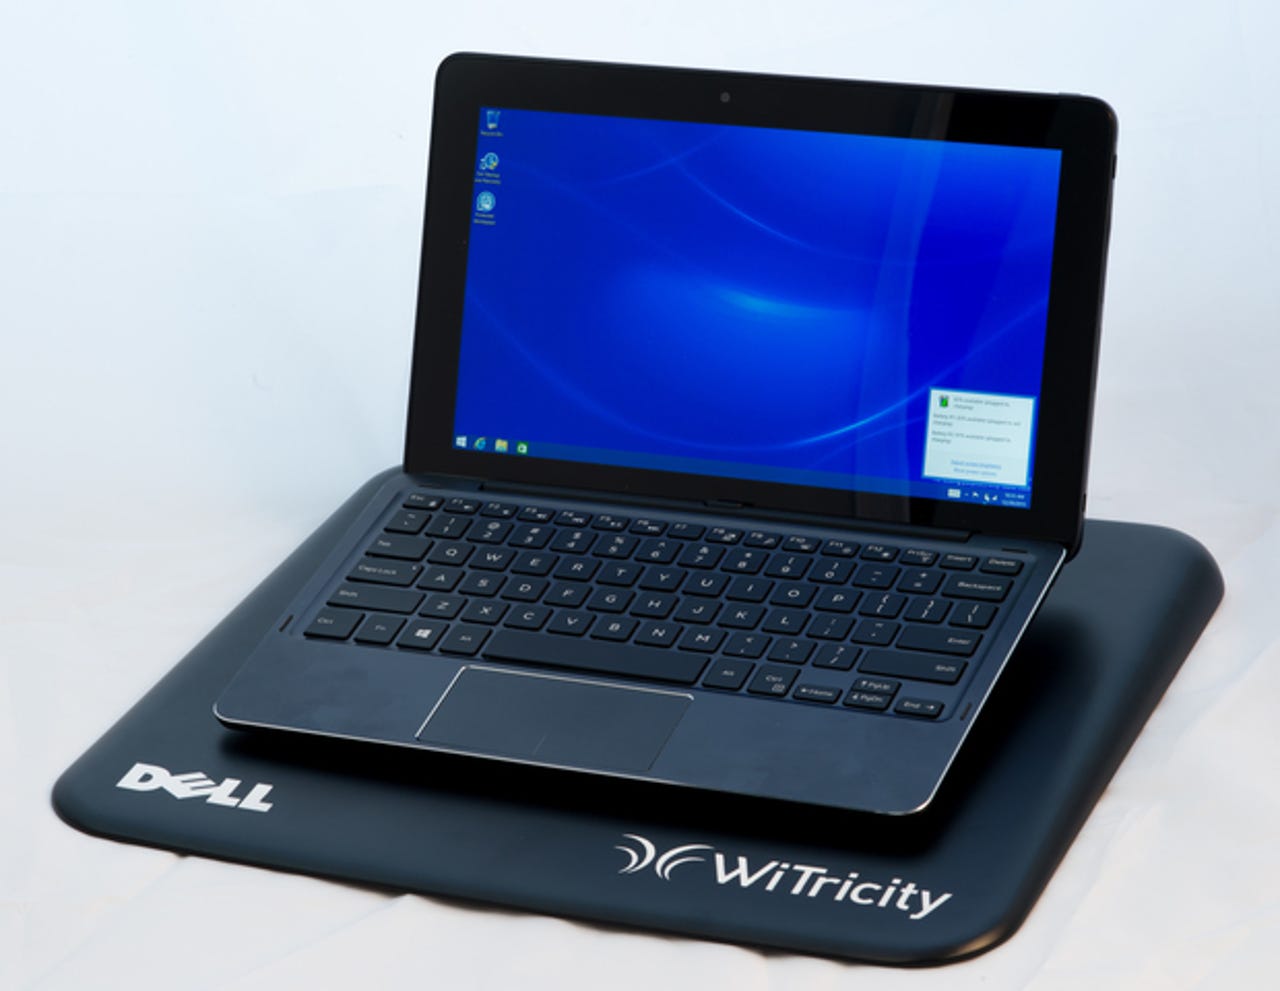 dell-witricity-wireless-charging-mat-laptop.jpg